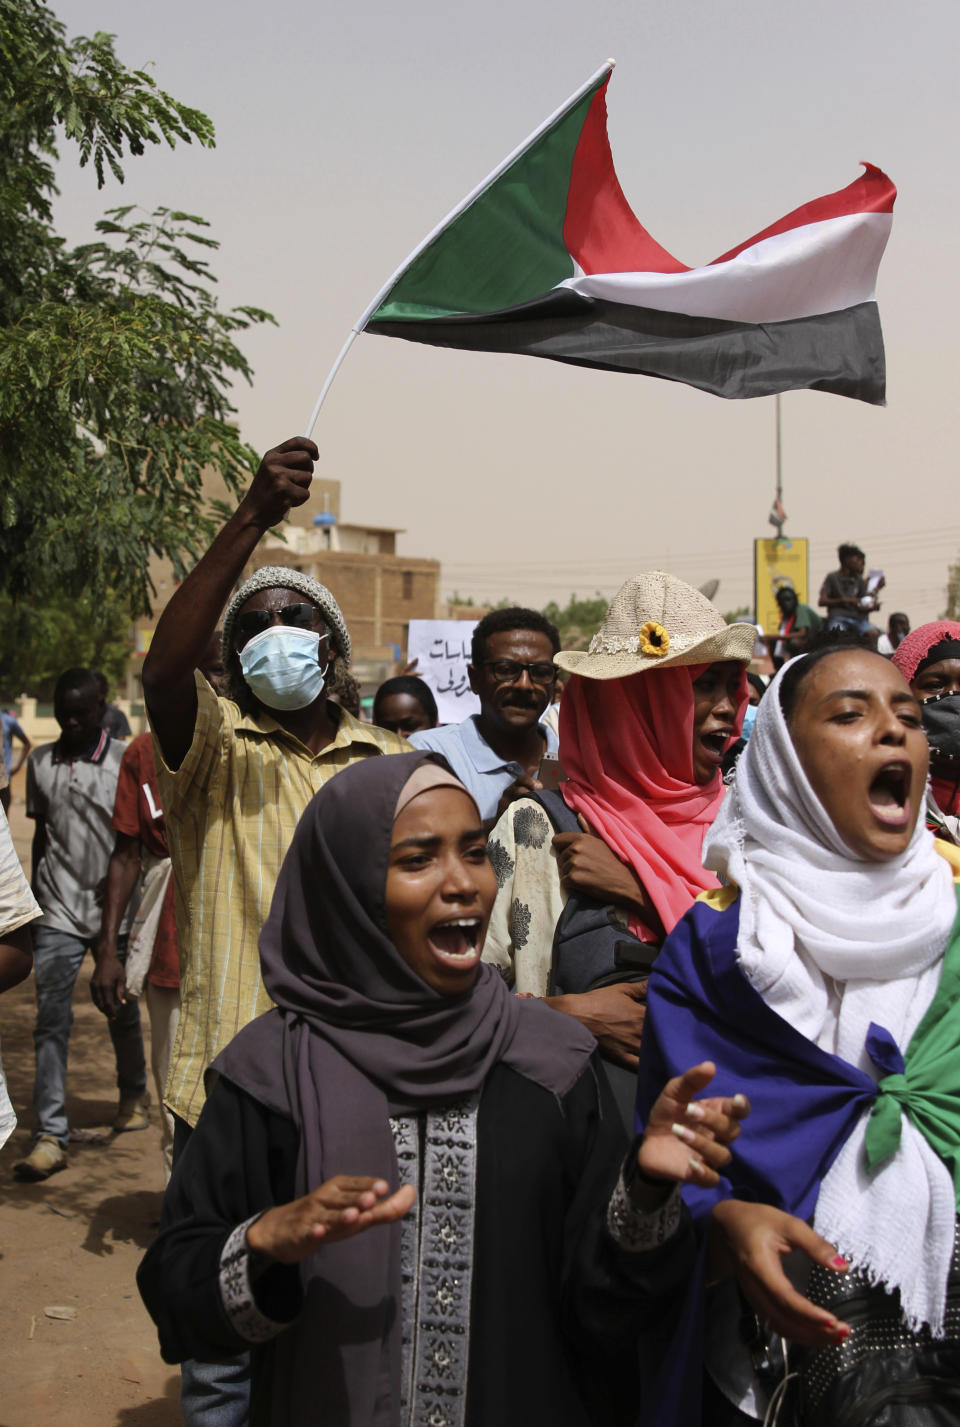 Sudanese take part in a protest over economic conditions, in Khartoum, Sudan, Wednesday, June 30, 2021. The World Bank and the International Monetary Fund said in a joint statement Tuesday, that Sudan has met the initial criteria for over $50 billion in foreign debt relief, another step for the East African nation to rejoin the international community after nearly three decades of isolation. (AP Photo/Marwan Ali)